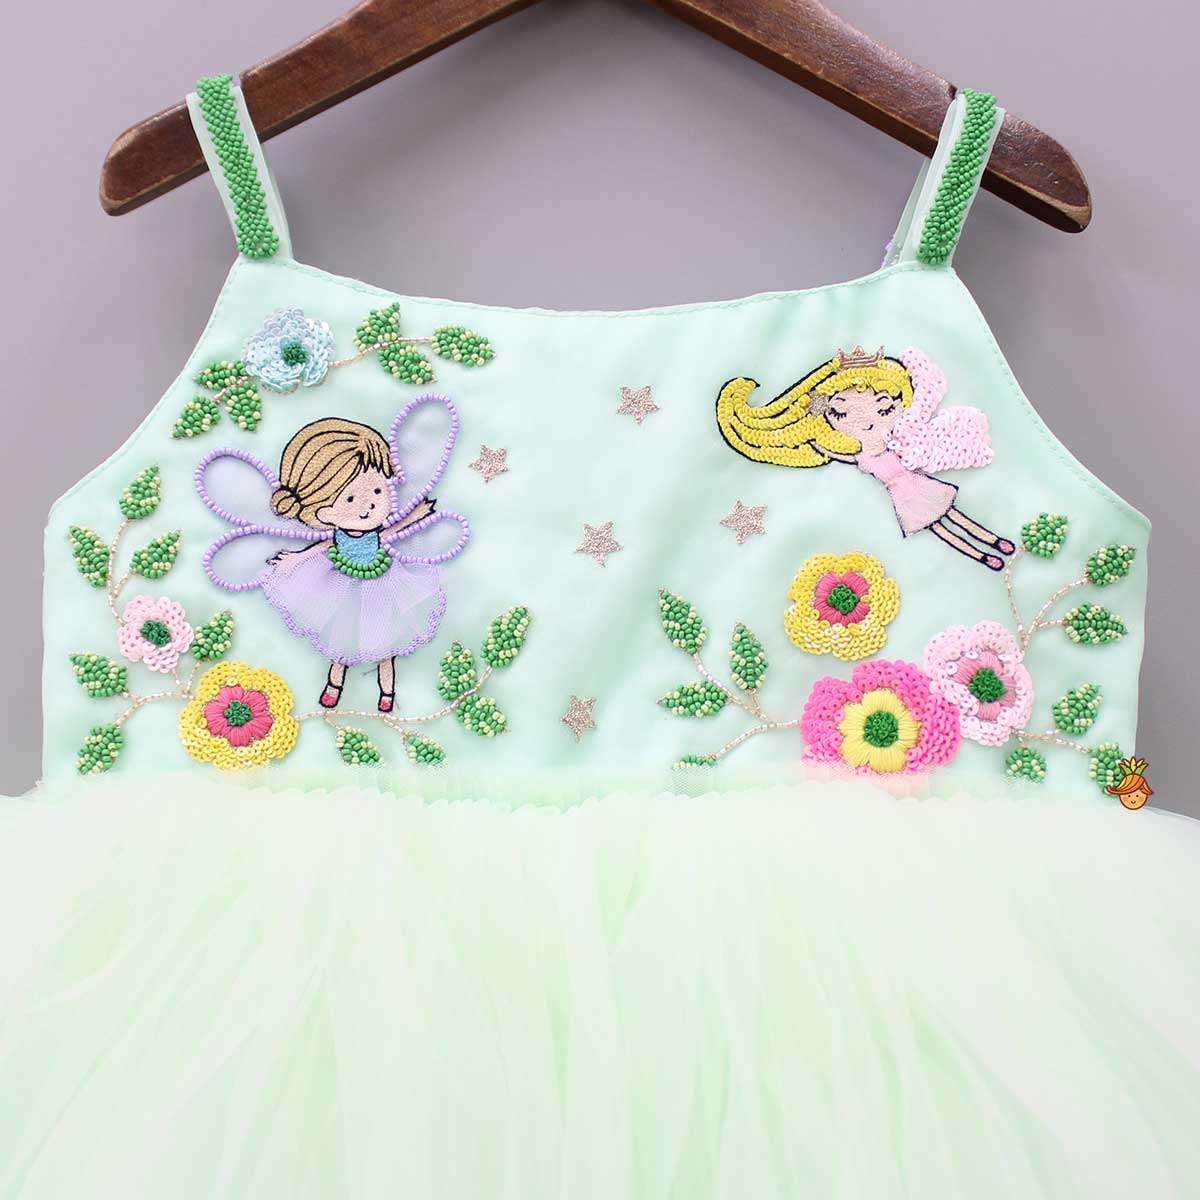 Sequins Fairies Embroidered Green Ruffled Dress